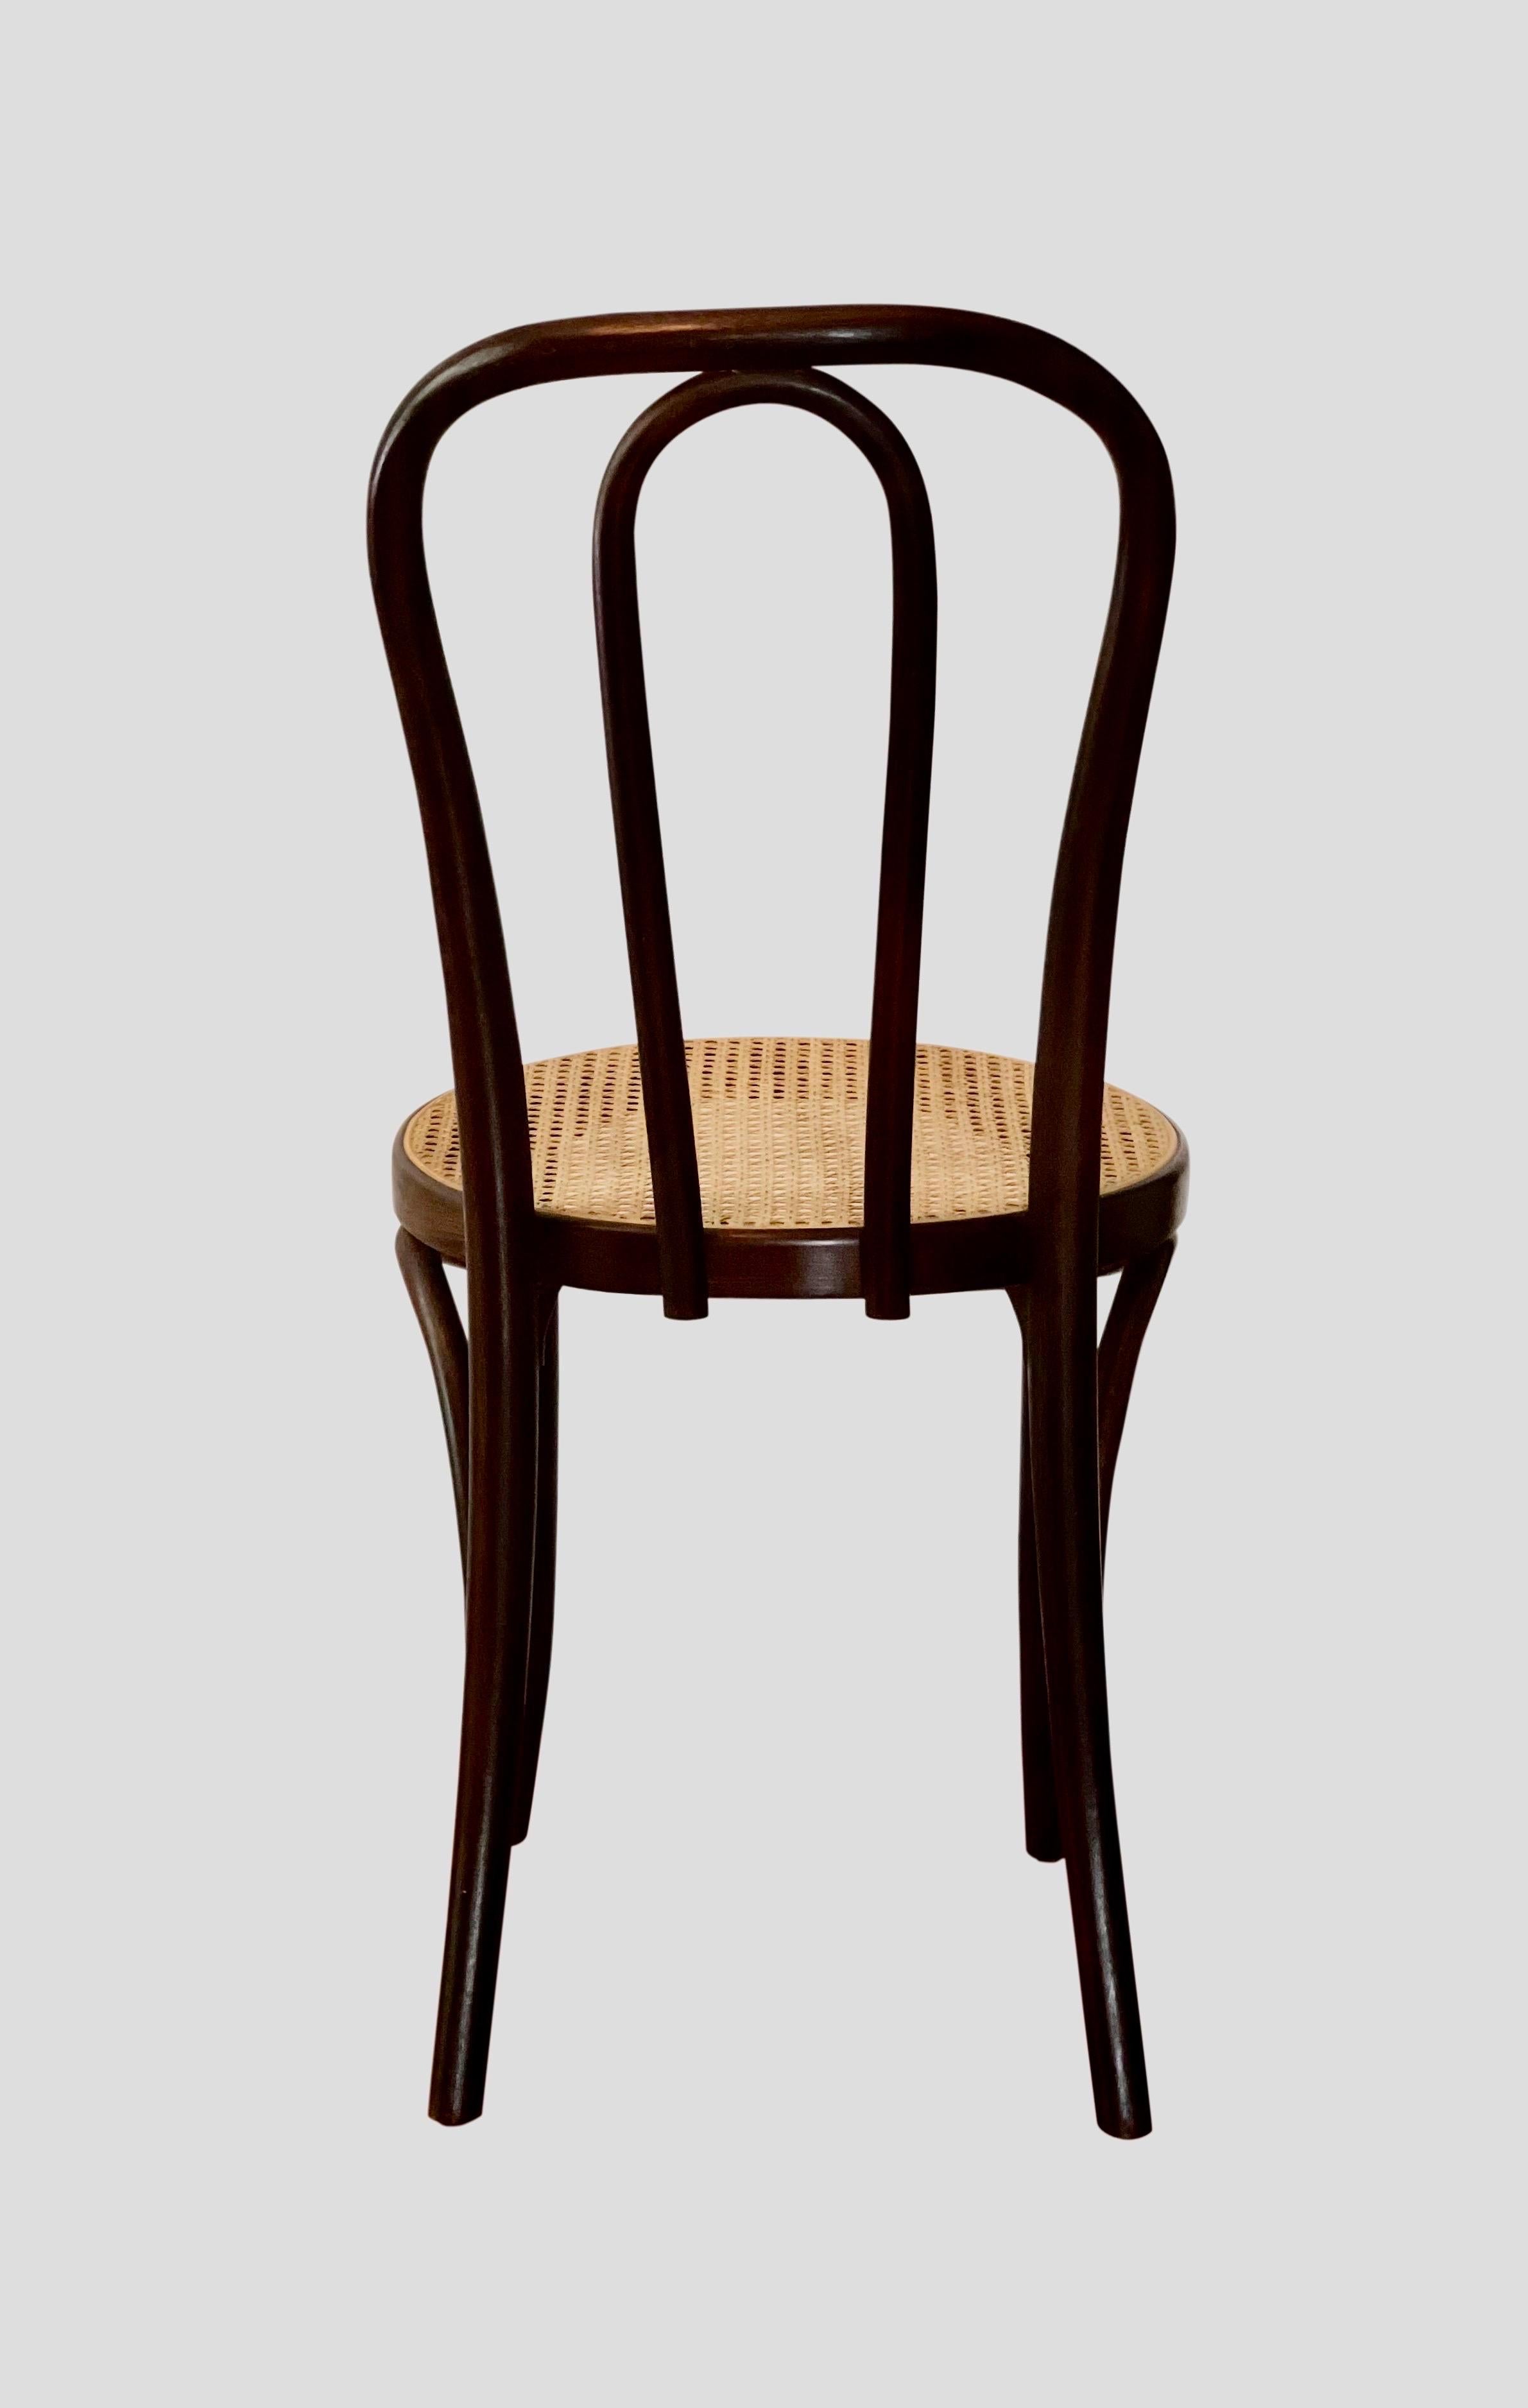 European Thonet Bentwood Cane Bistro or Side Chair, 1920's For Sale